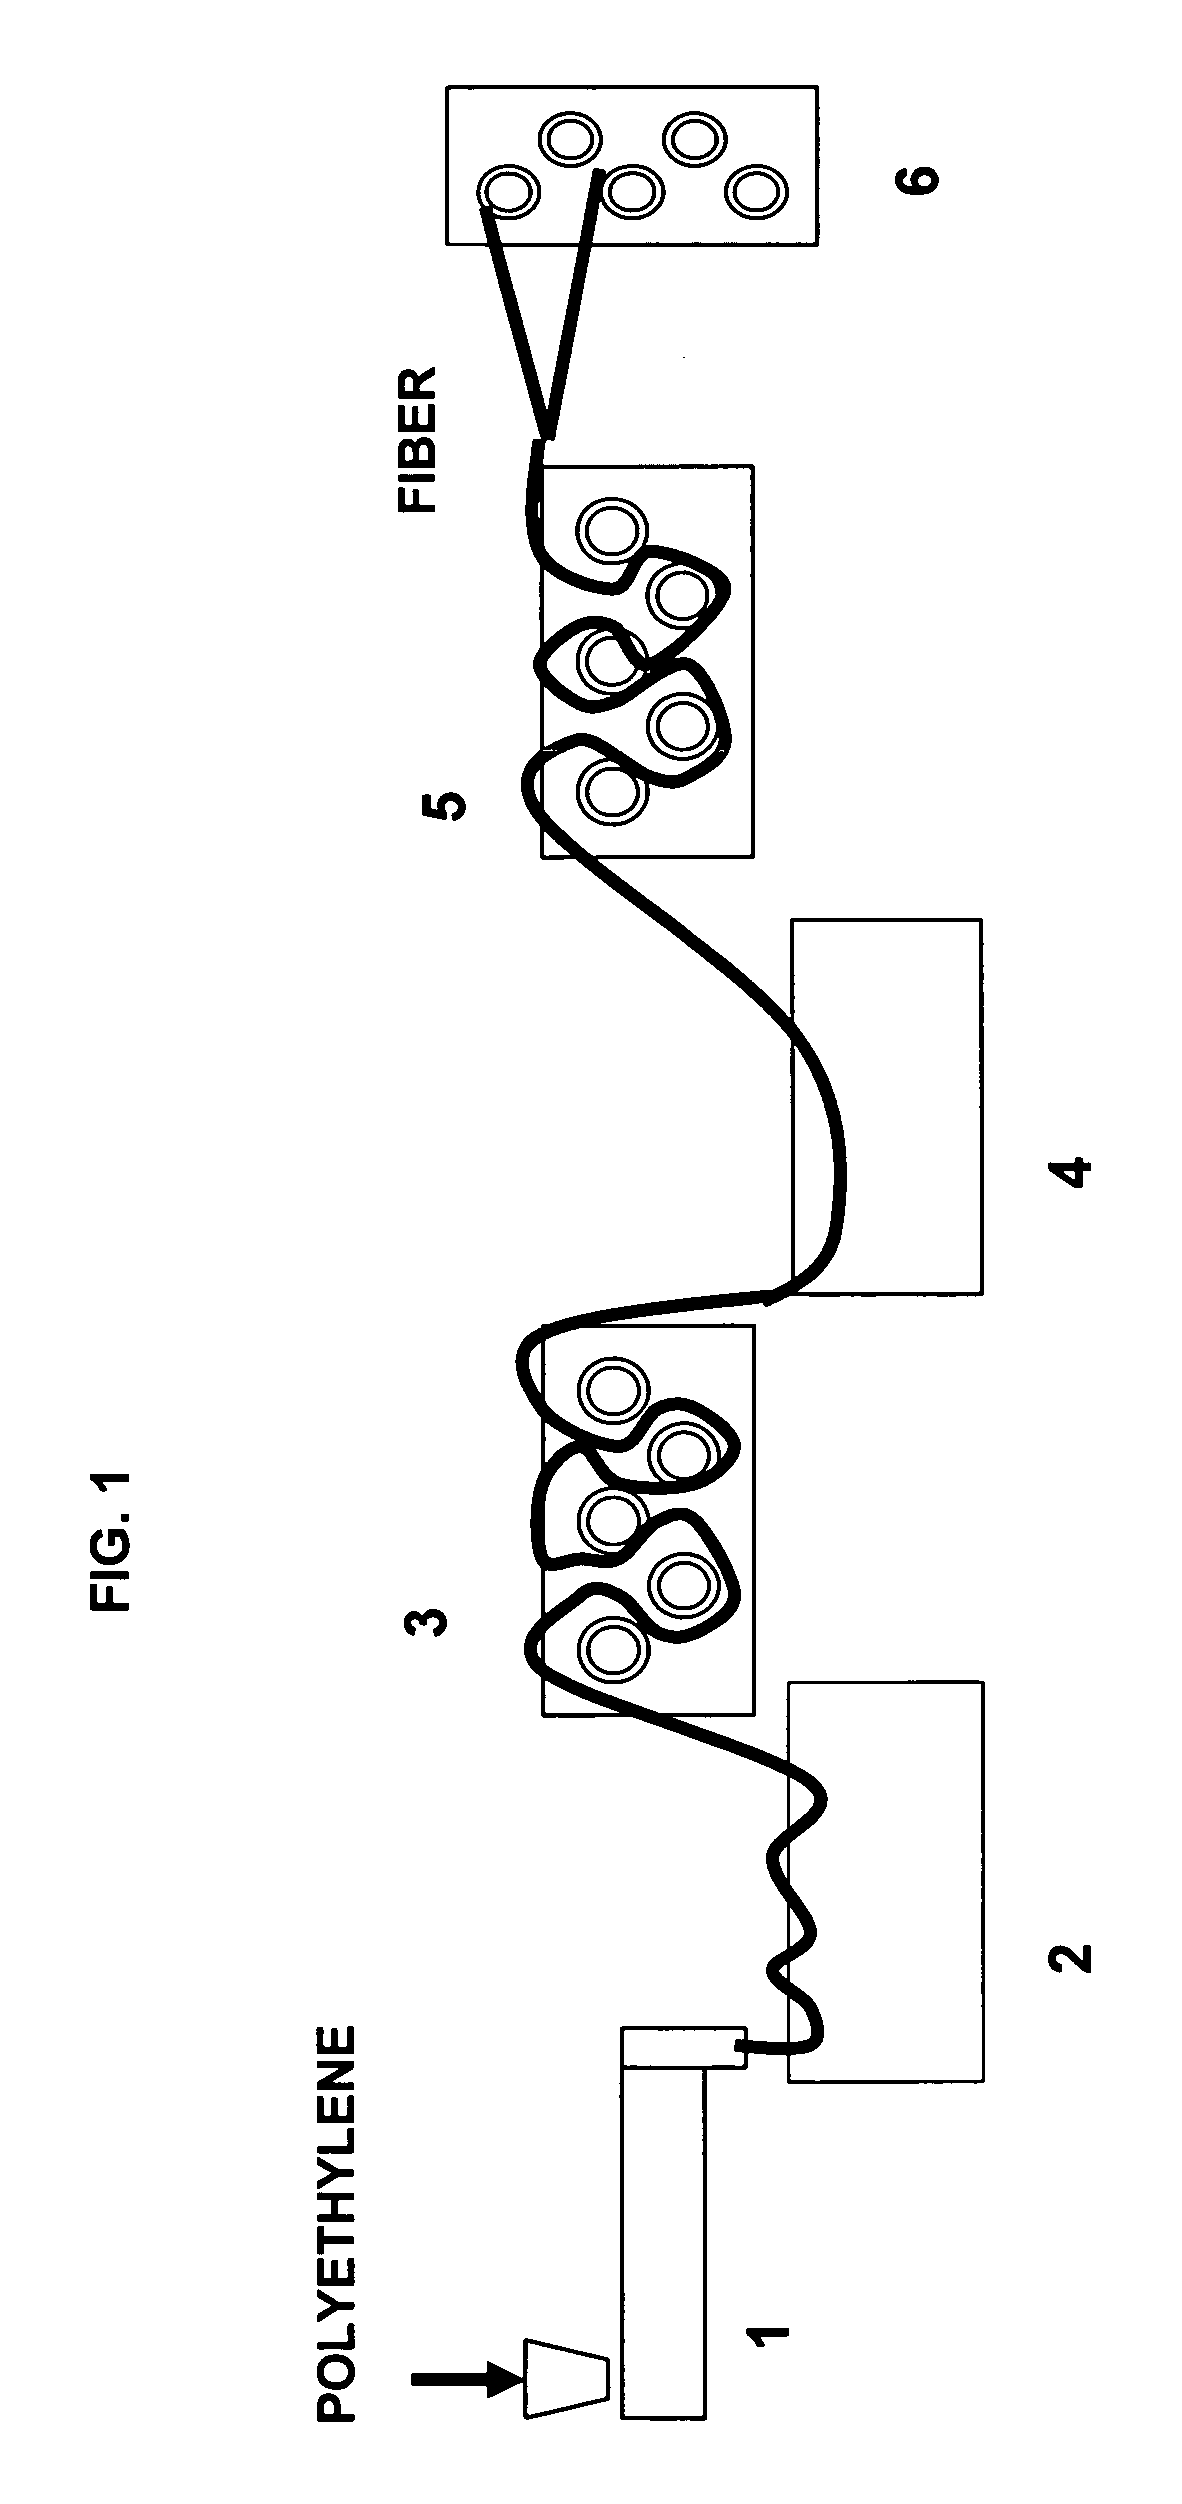 Fiber and process for obtaining same from high-modulus, extrudable polyethylene